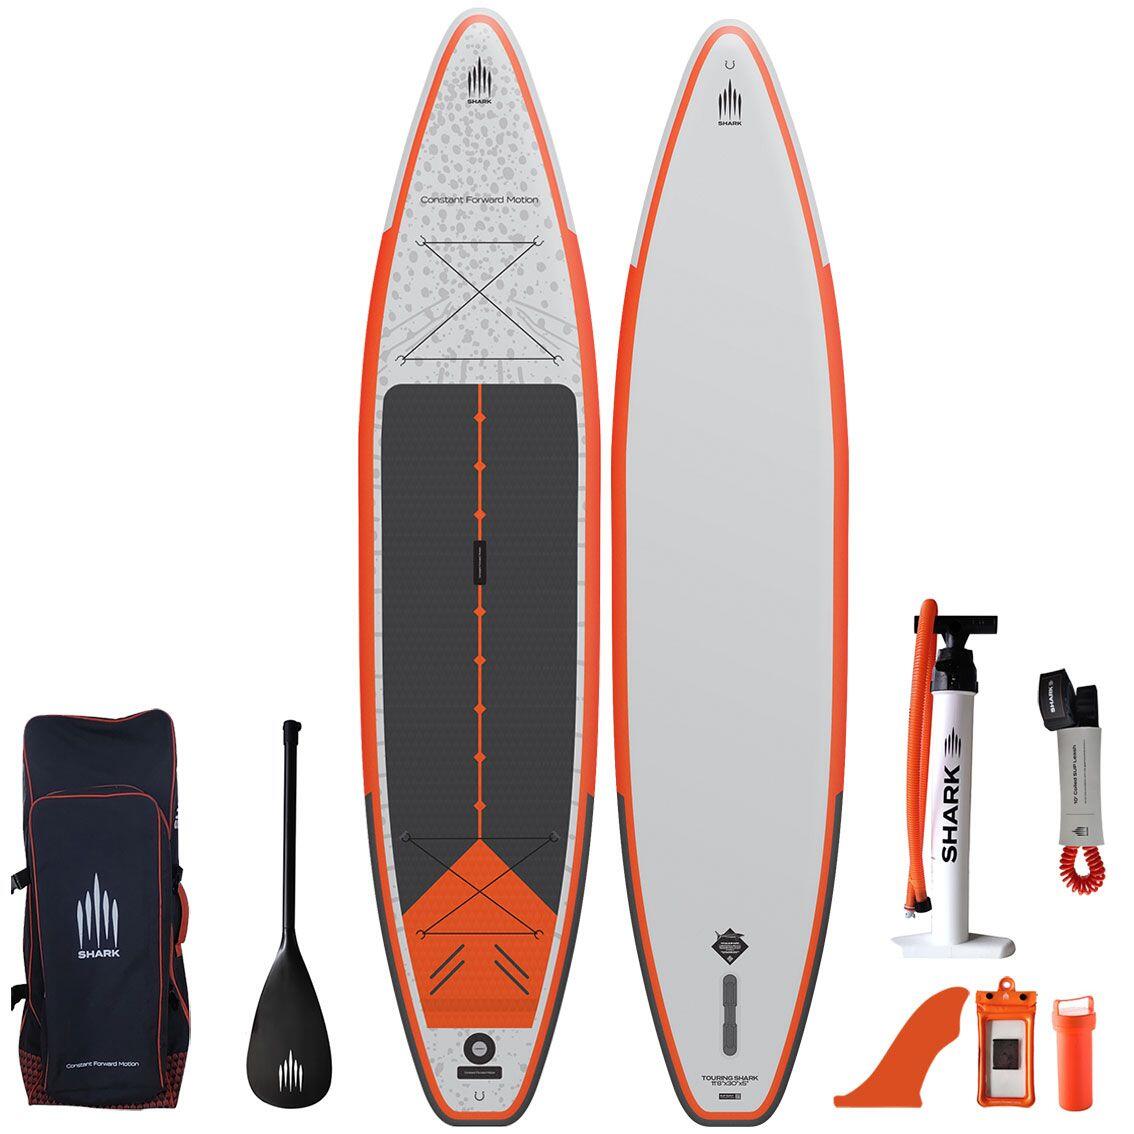 SHARK TOURING 11'8 x 30" x 5" FOR THE SHORTER RIDER 1/6